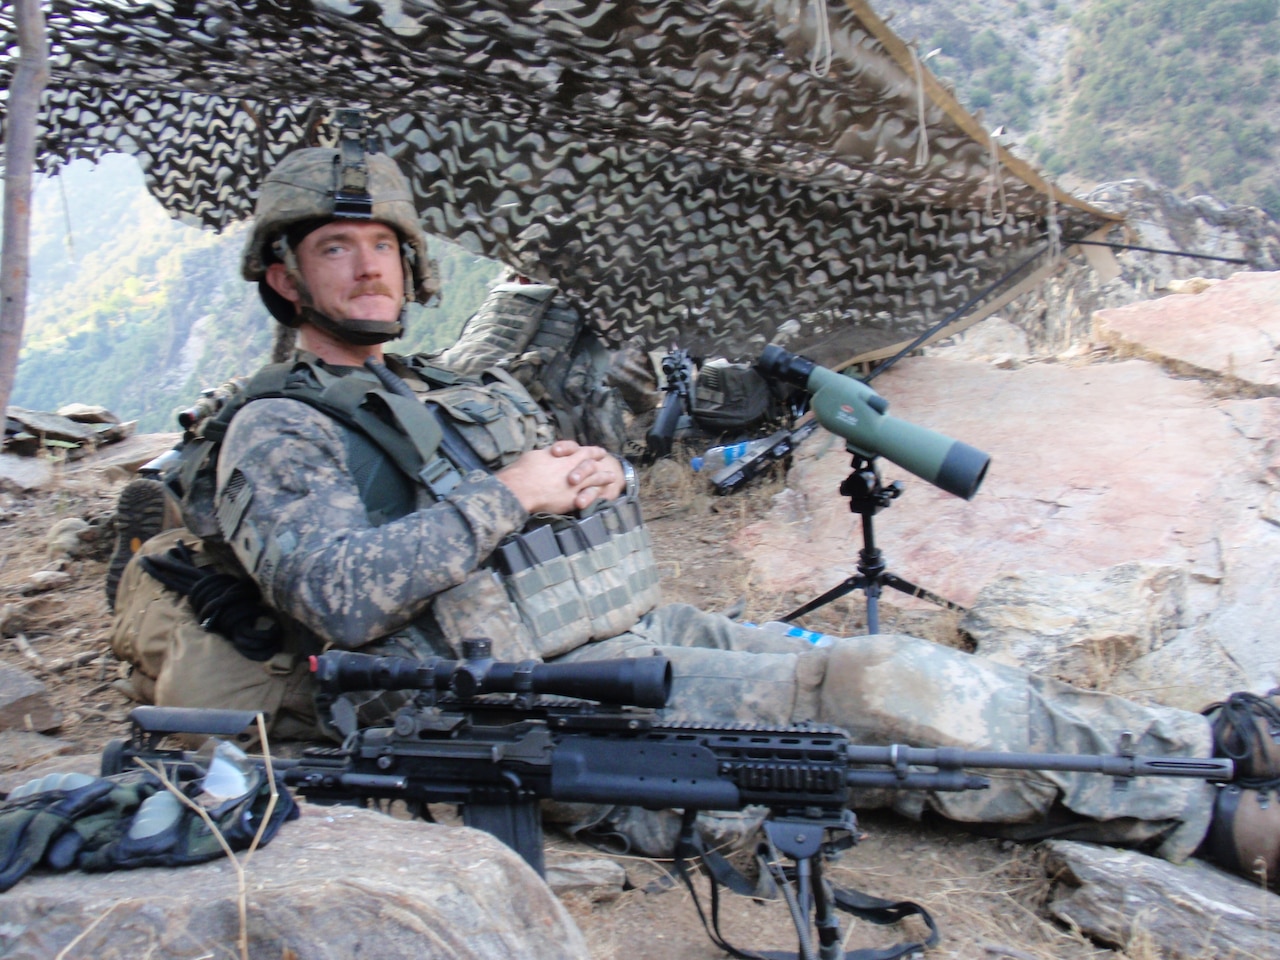 A soldier in combat gear leans against a cargo pack beside a scope and a rifle.